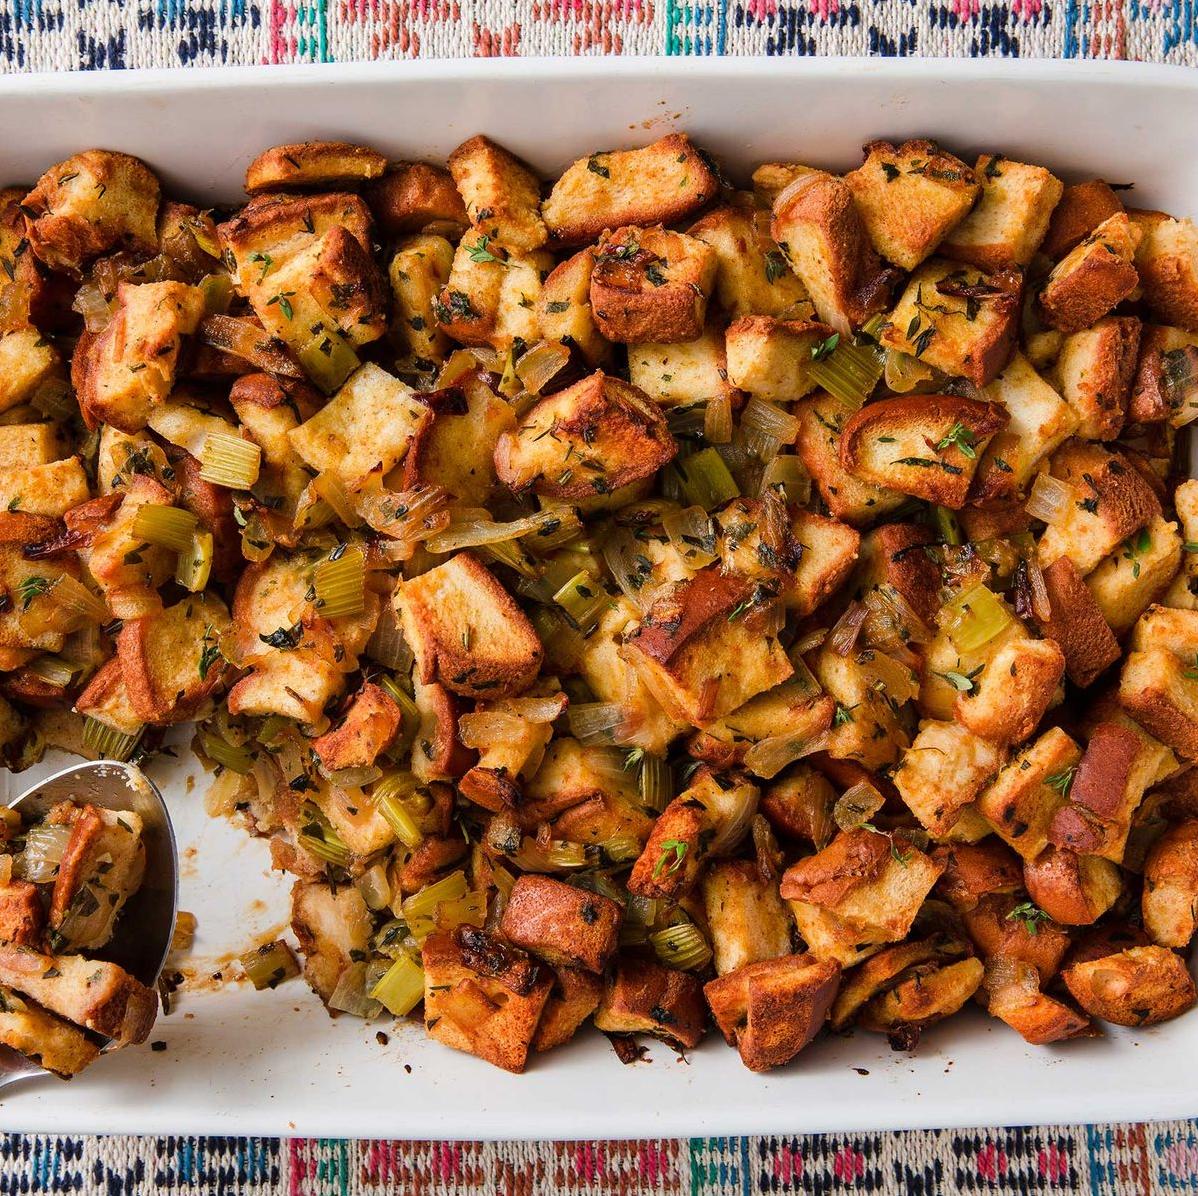  Want to impress your gluten-free guests? Serve up this mouthwatering stuffing.